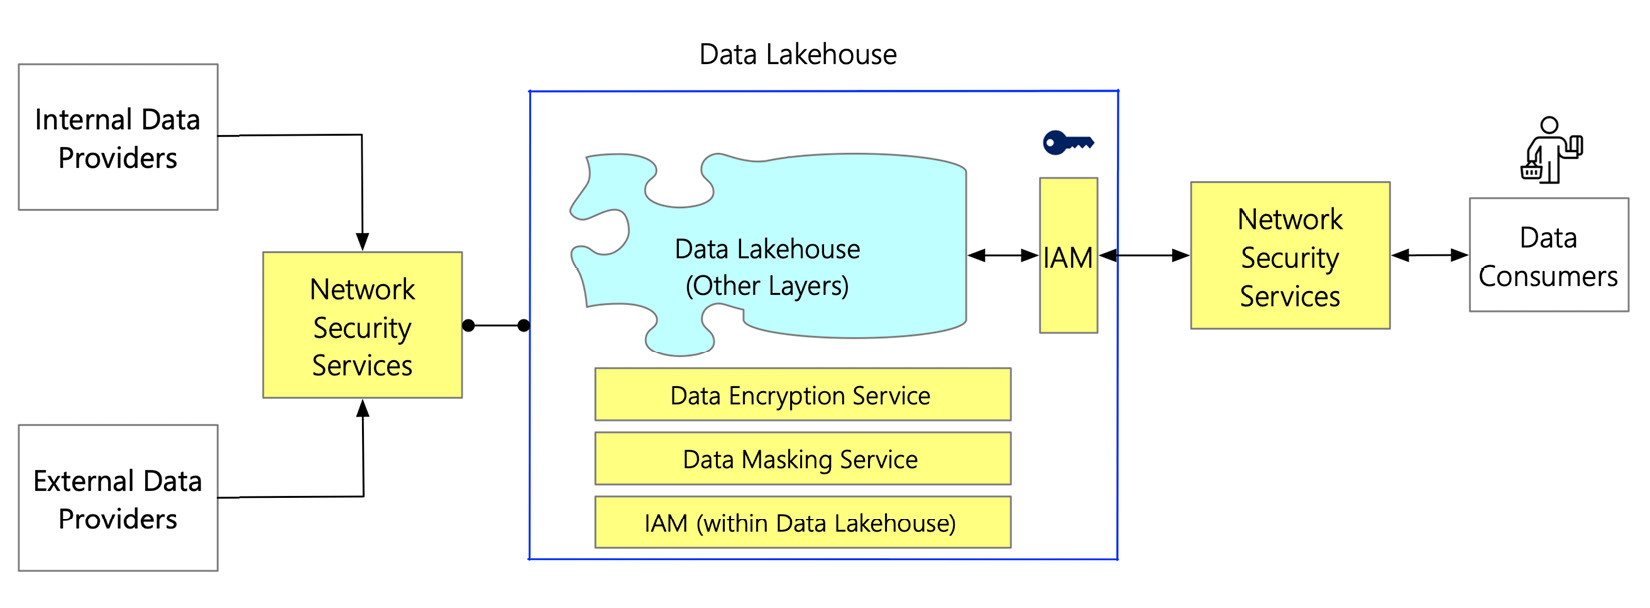 Figure 7.2 – Orchestration of various data security components in the data lakehouse
